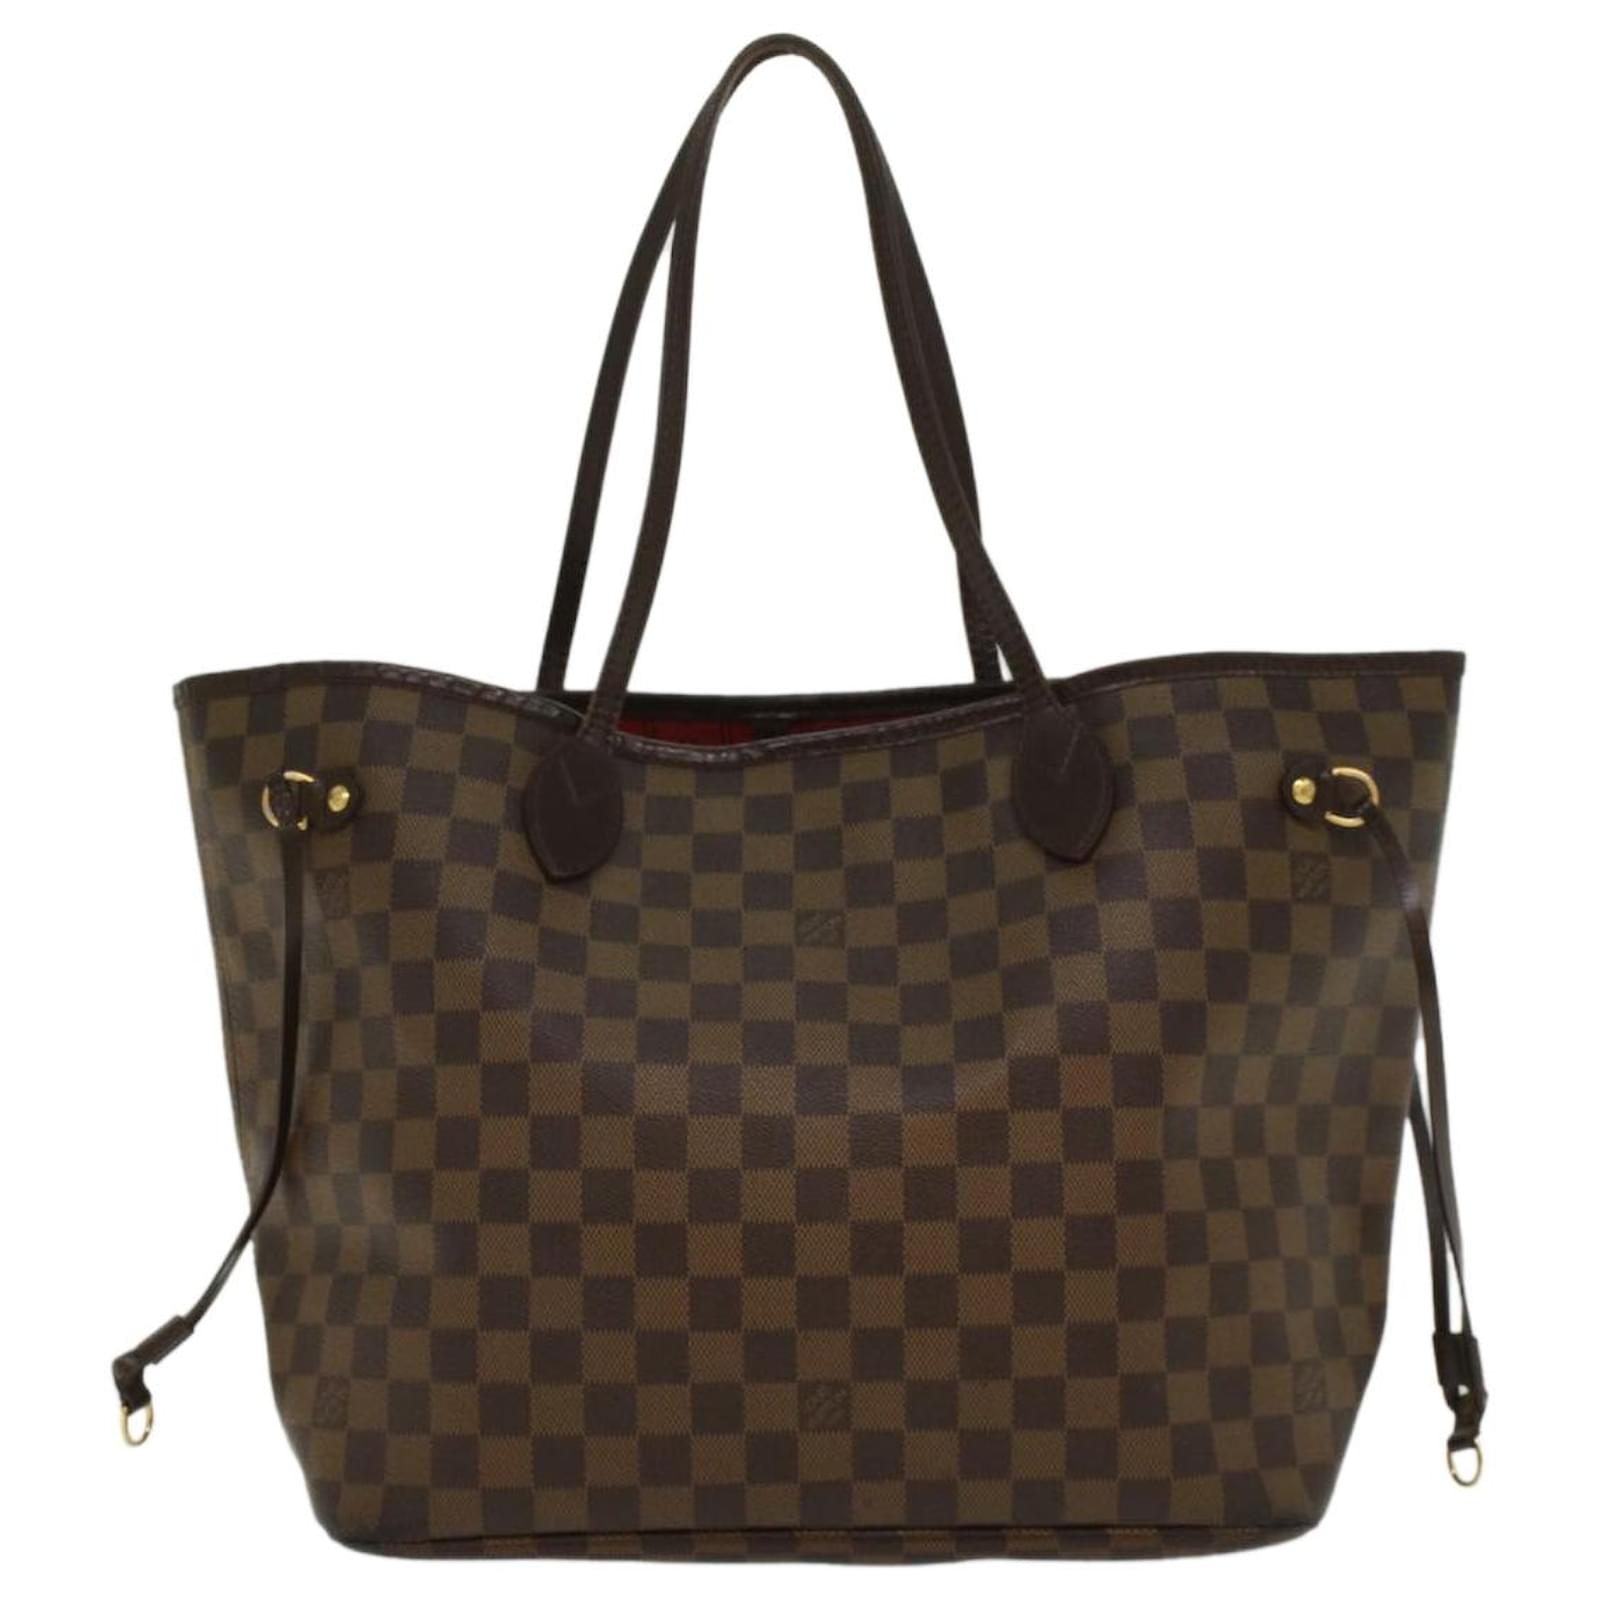 Auth Louis Vuitton Damier Ebene Neverfull MM Tote Bag Brown N51105 Used